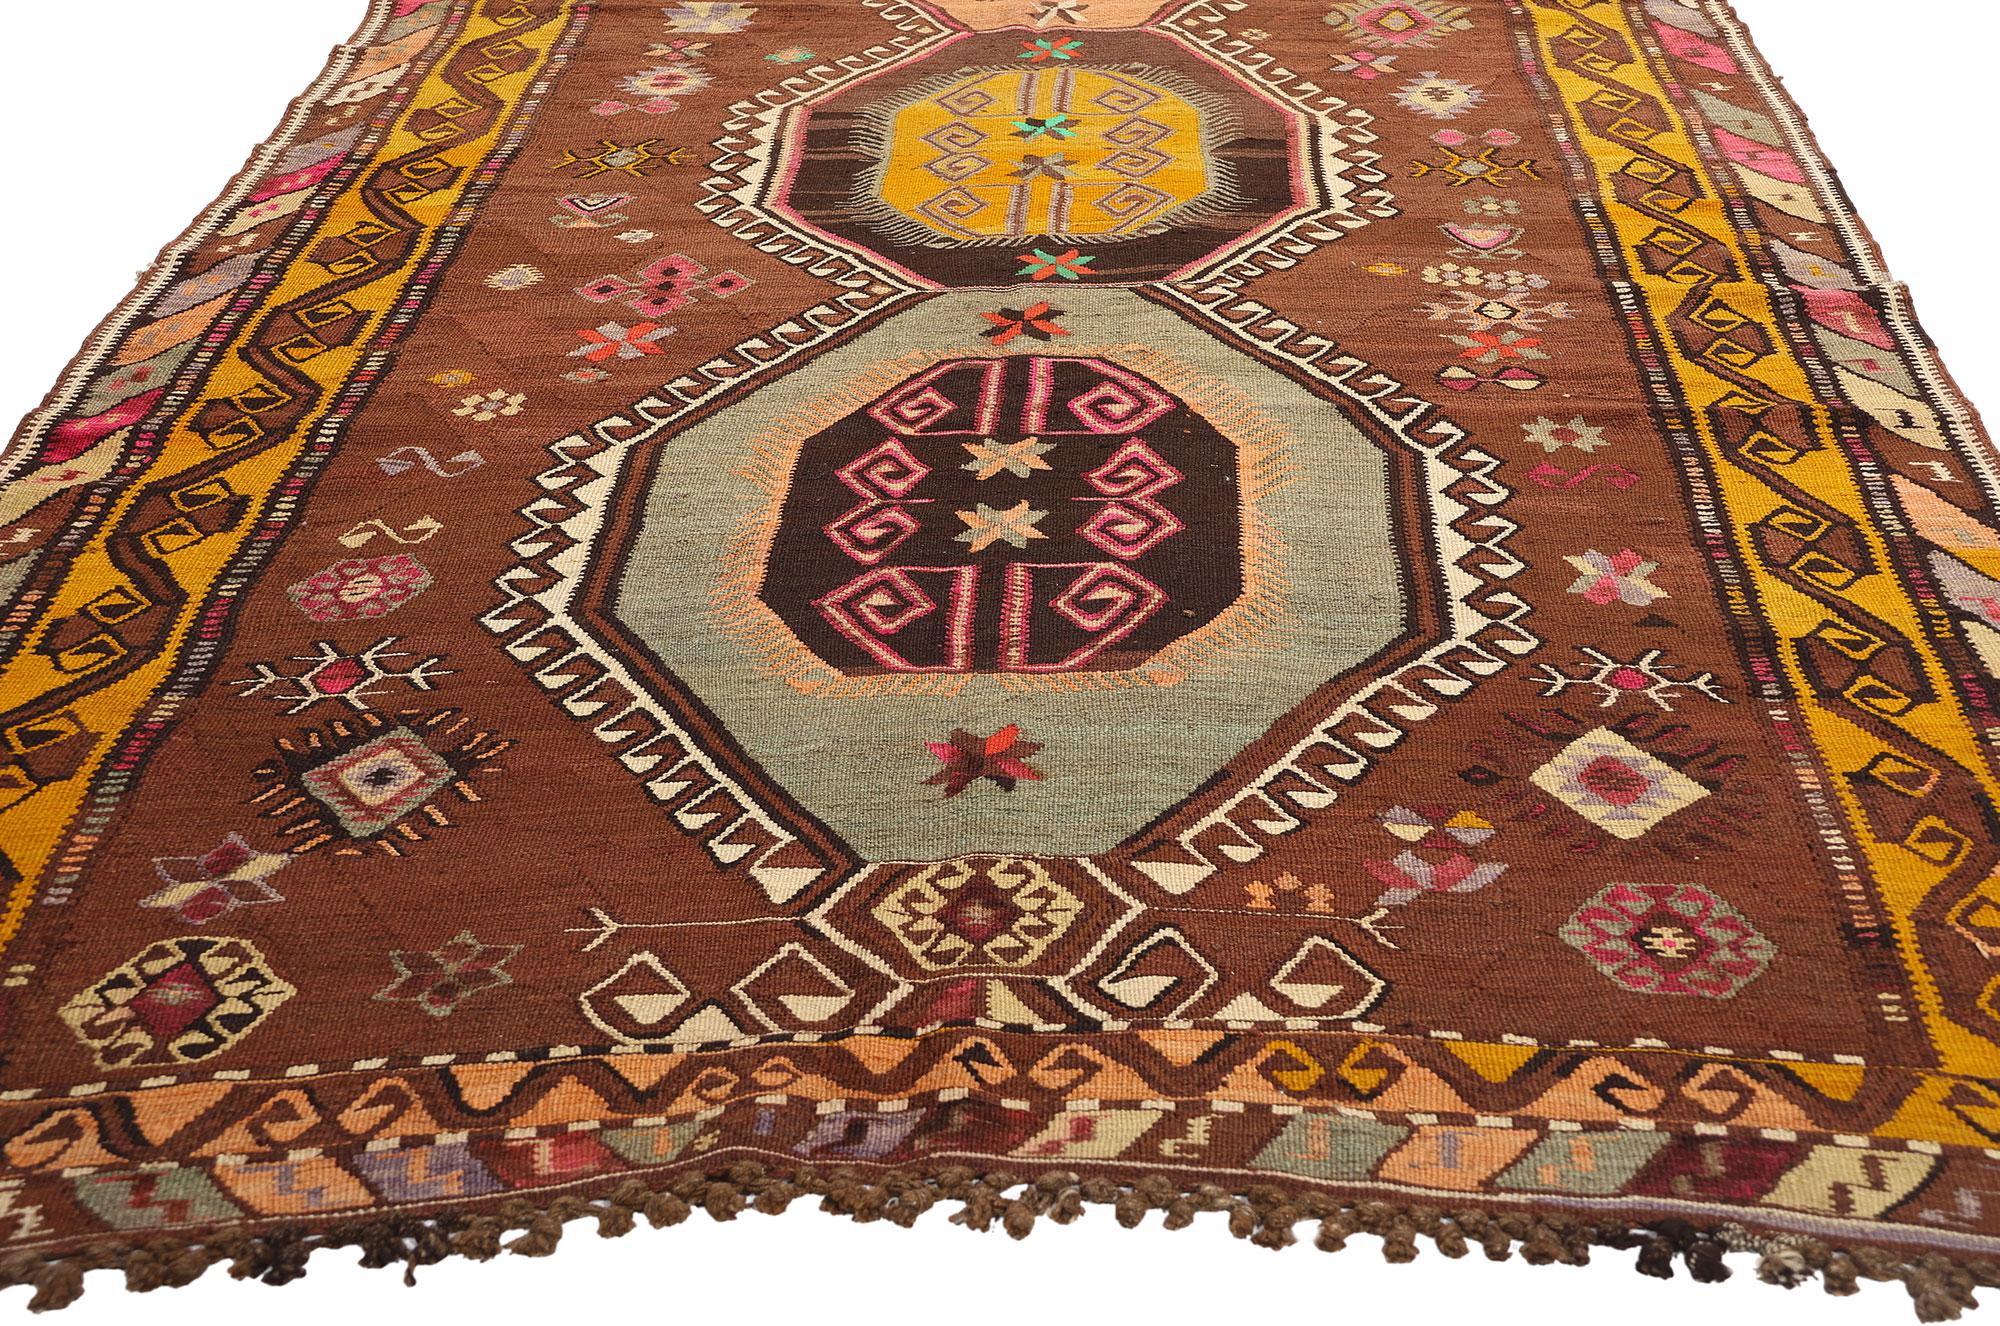  Vintage Turkish Kilim Rug, Colorful Bohemian Meets Tailor-Made Elegance In Good Condition For Sale In Dallas, TX